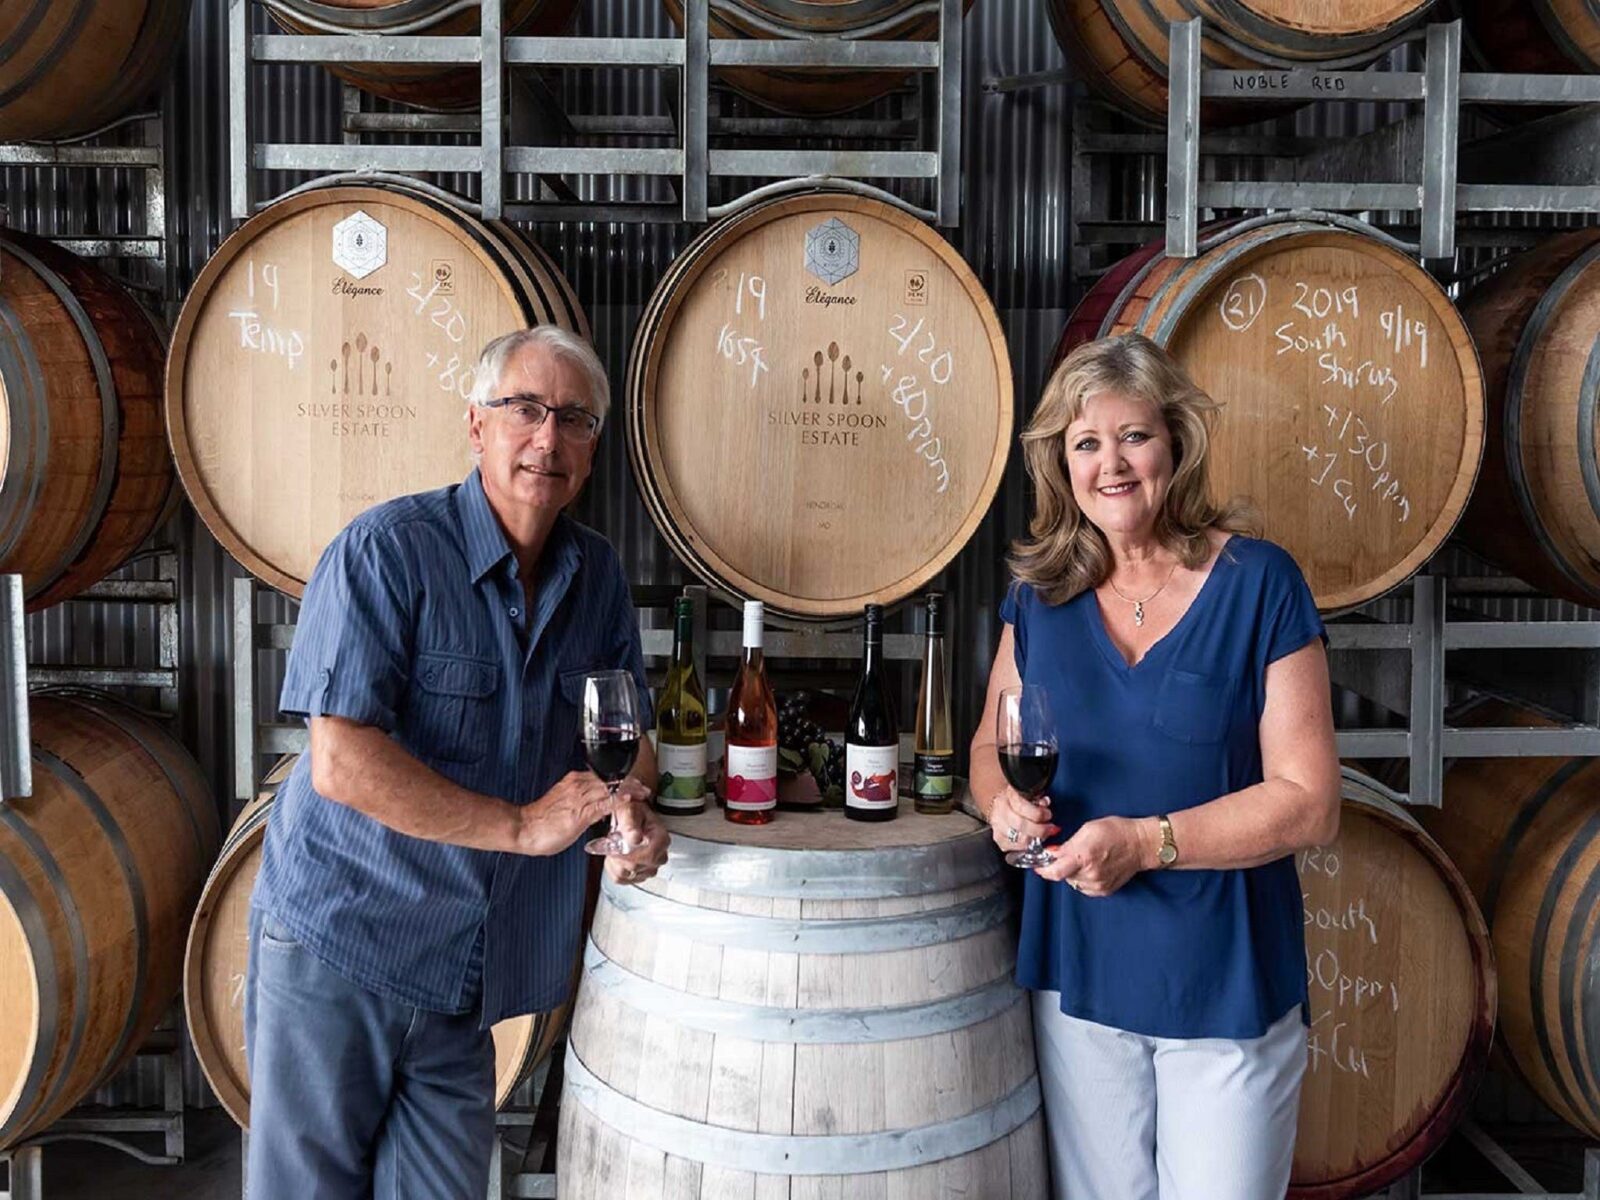 Silver Spoon Estate owners and wine makers Tracie and Peter in the Cellar Door